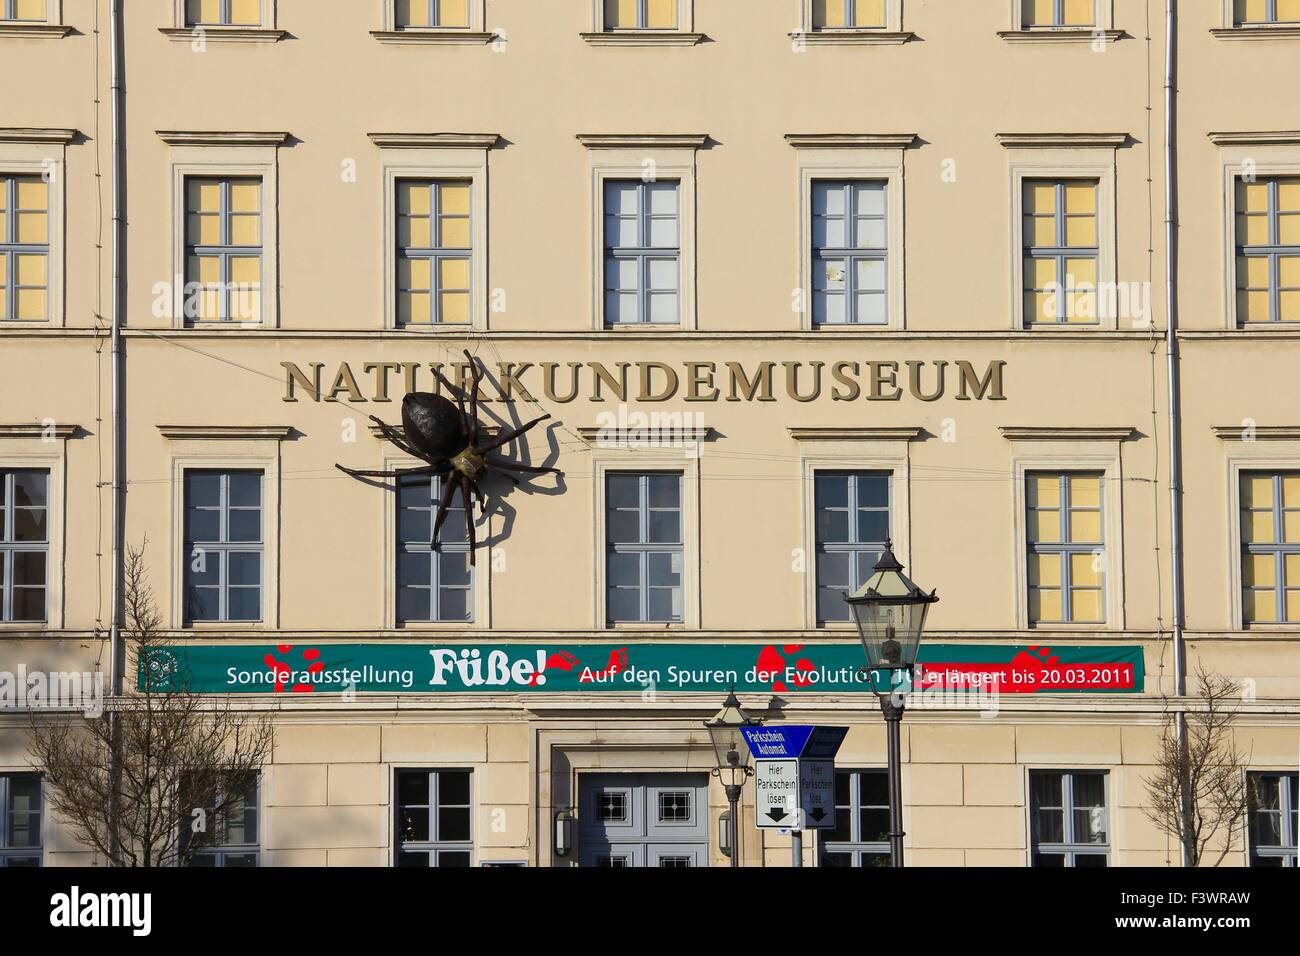 natural history museum in leipzig Stock Photo